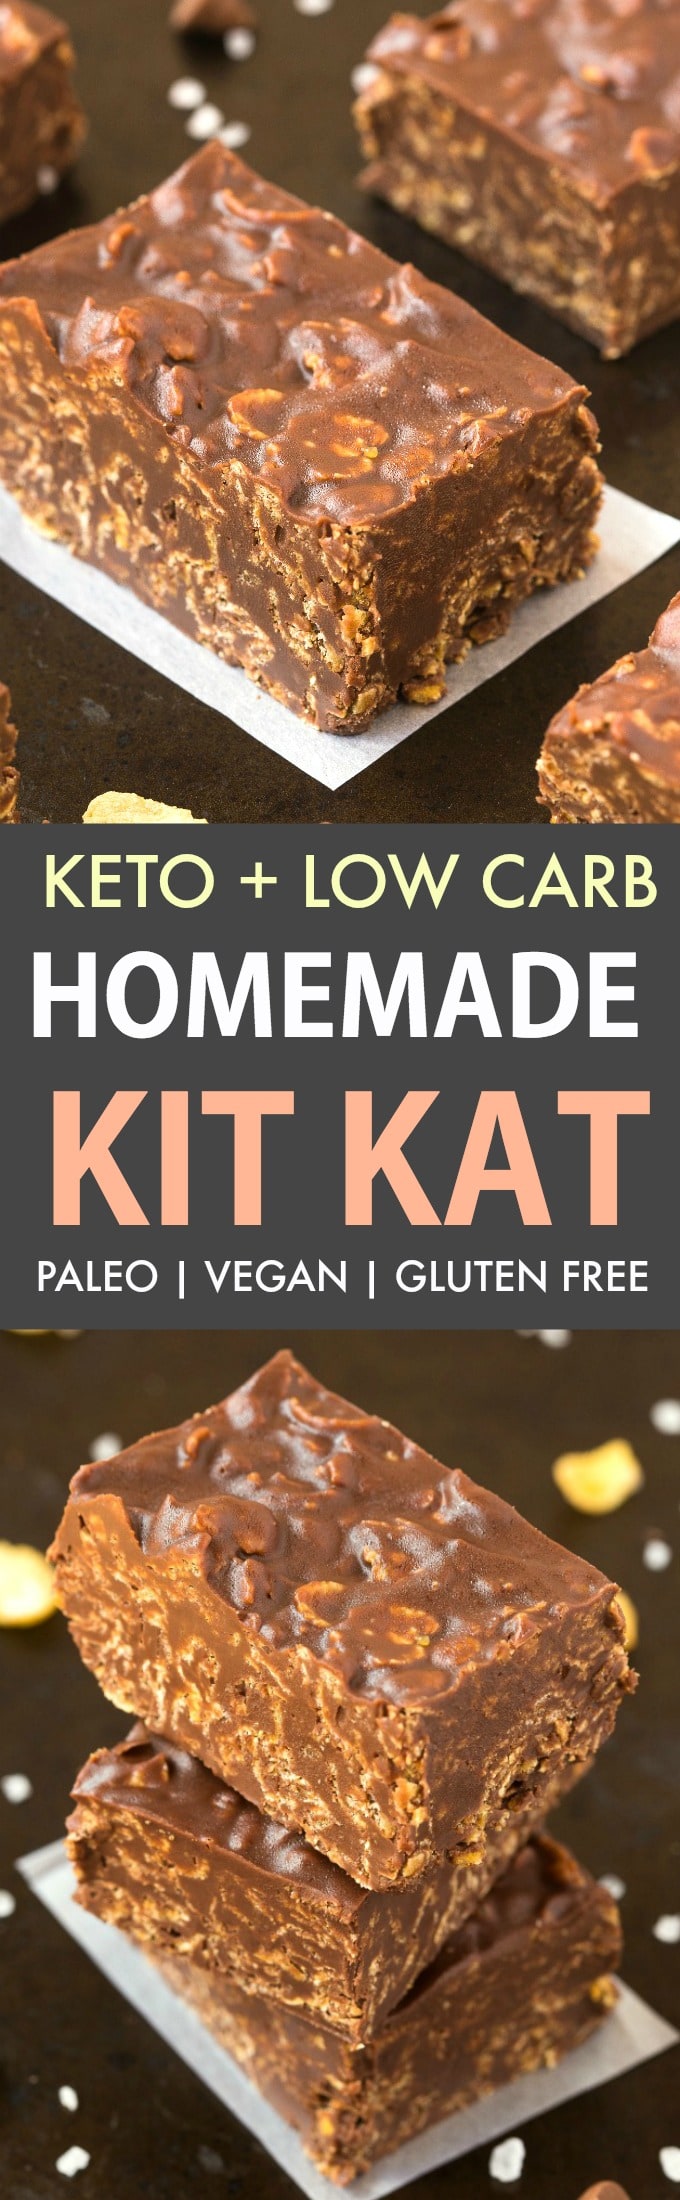 A collage of homemade keto kit kat bars- Chocolate bars loaded with crispy cereal, nuts and seeds